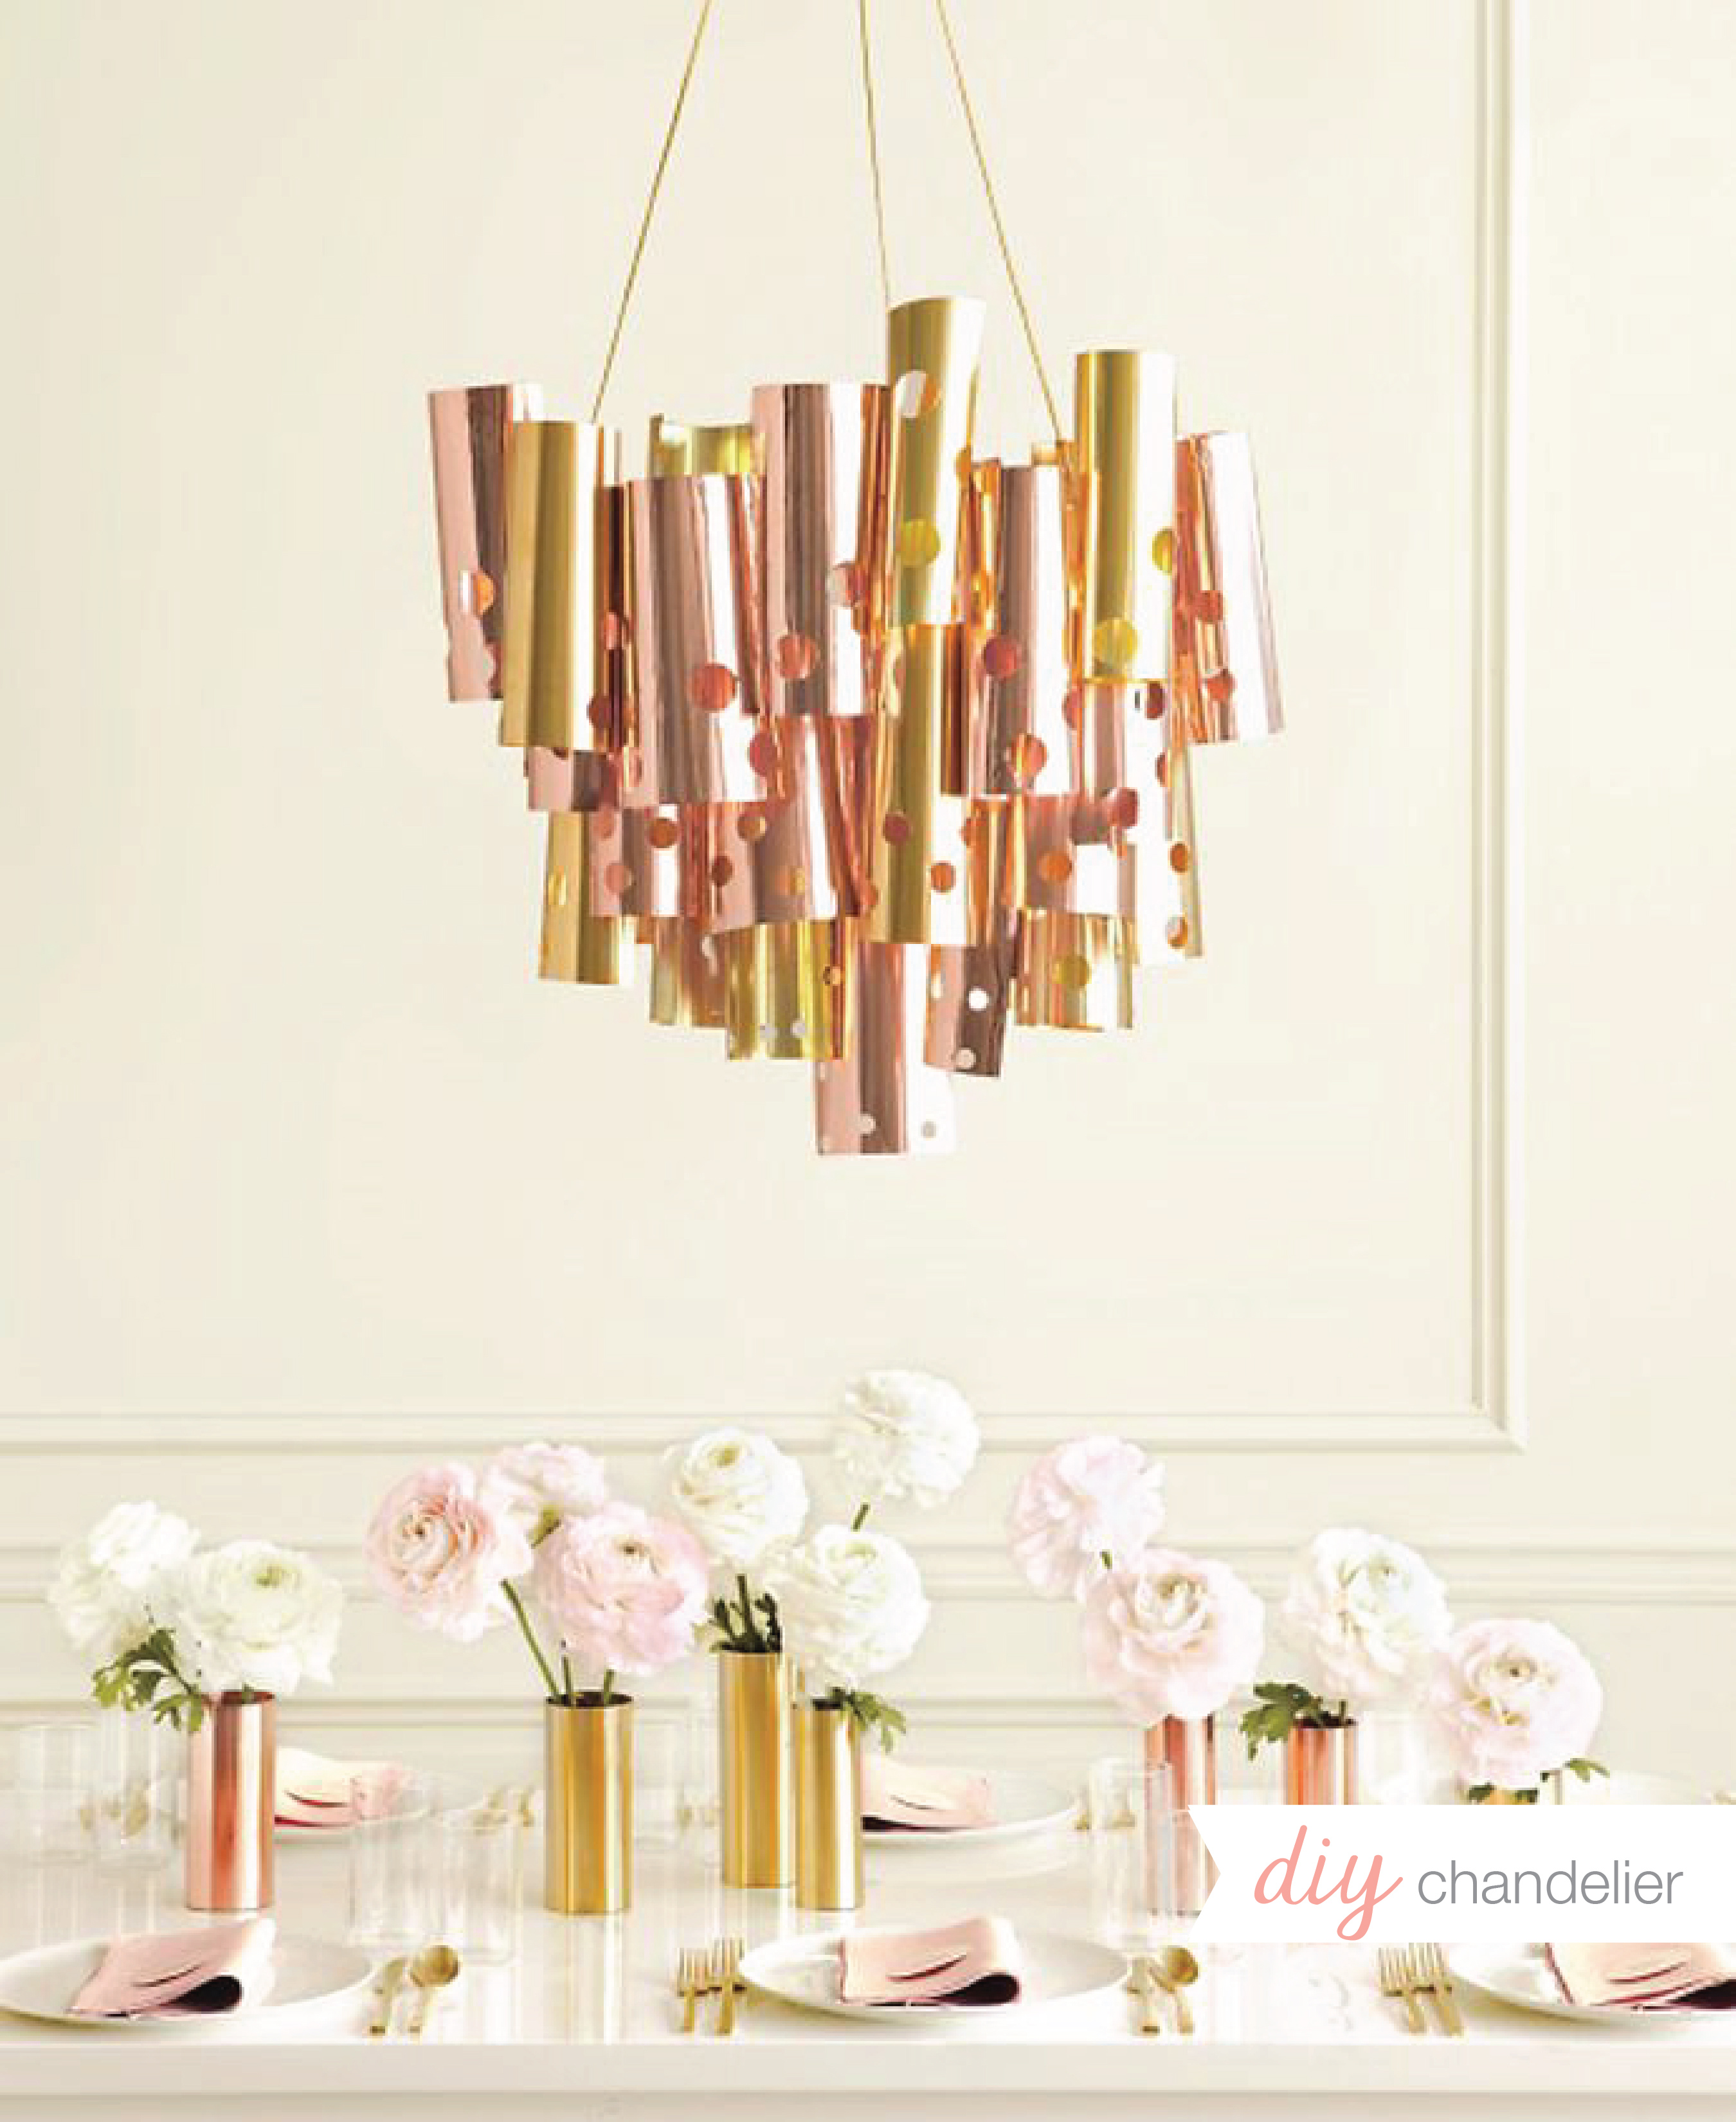 impressive chandelier from budget-friendly metal sheets for your wedding table